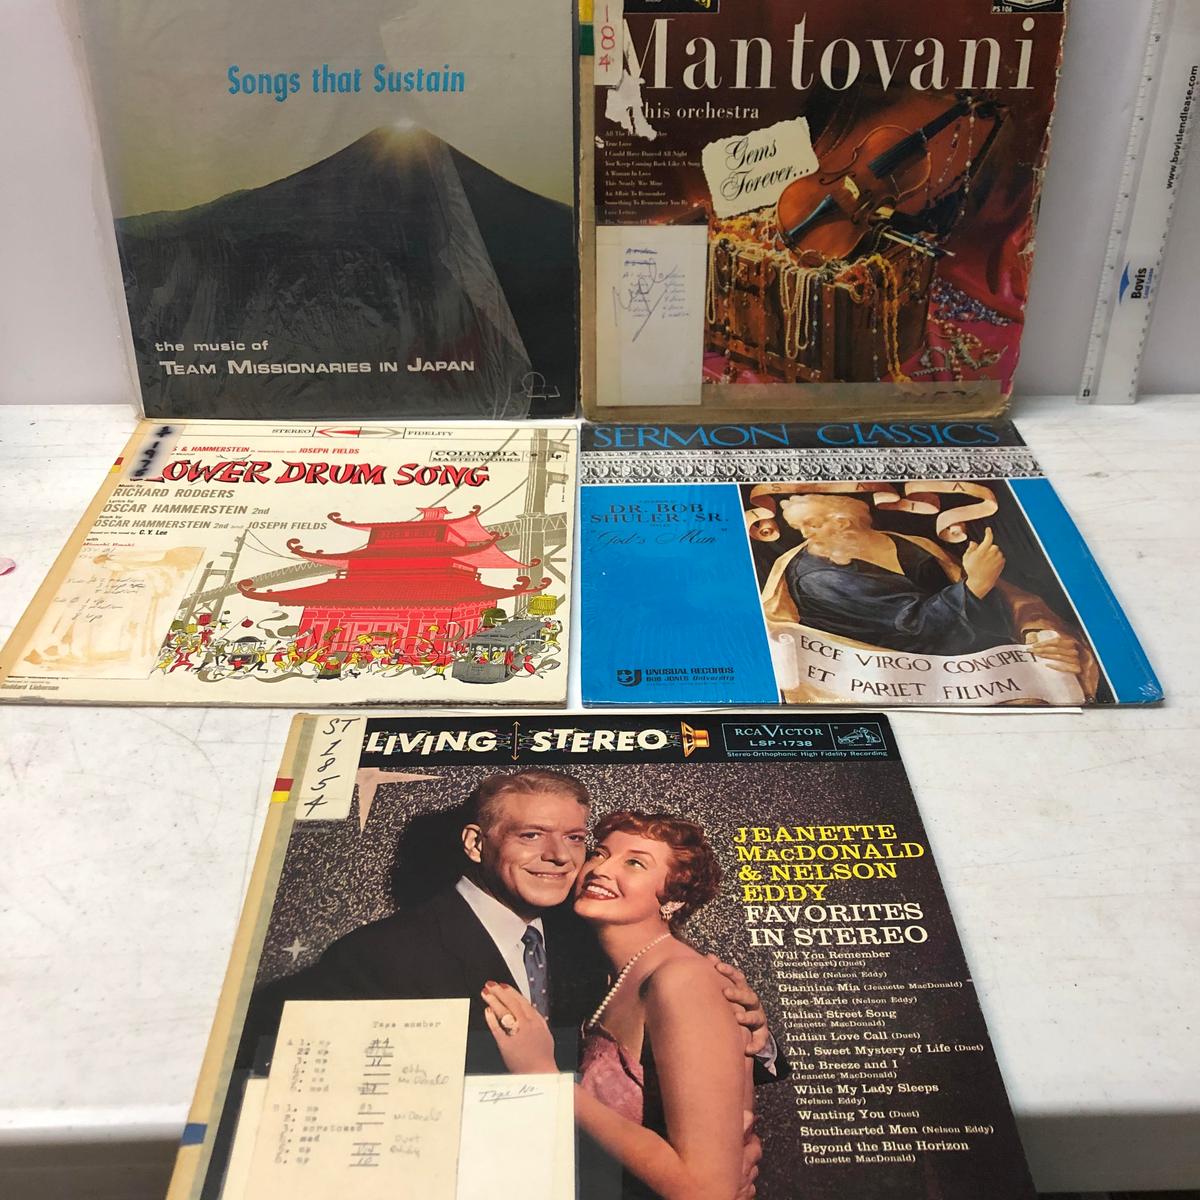 Favorites in Stereo by Jeanette MacDonald and Nelson Eddy and More Record Albums Lot of 5